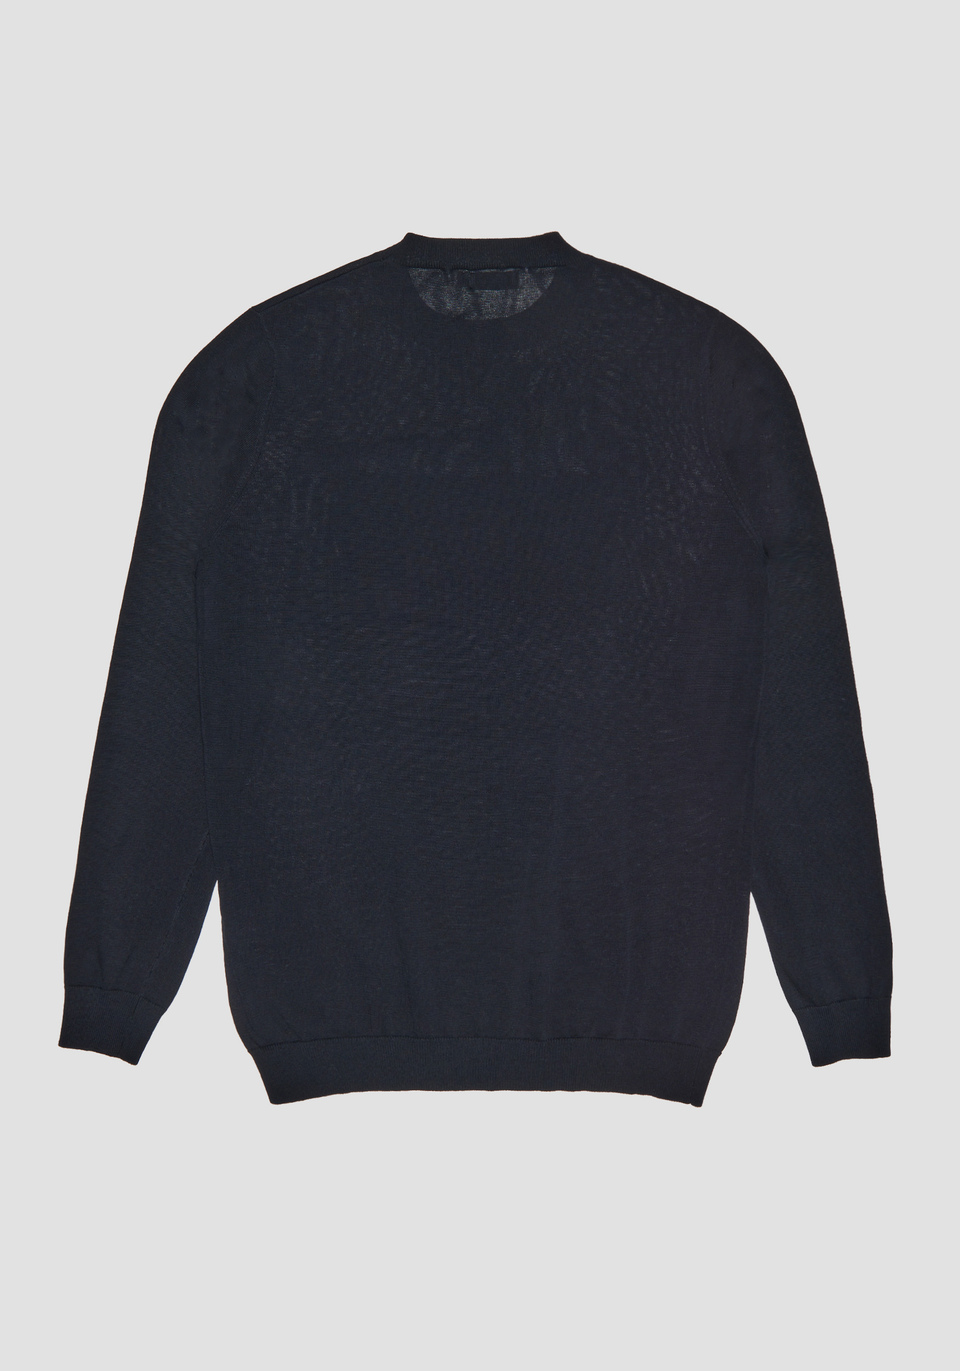 SWEATER IN PURE COTTON YARN WITH LOGO - Antony Morato Online Shop